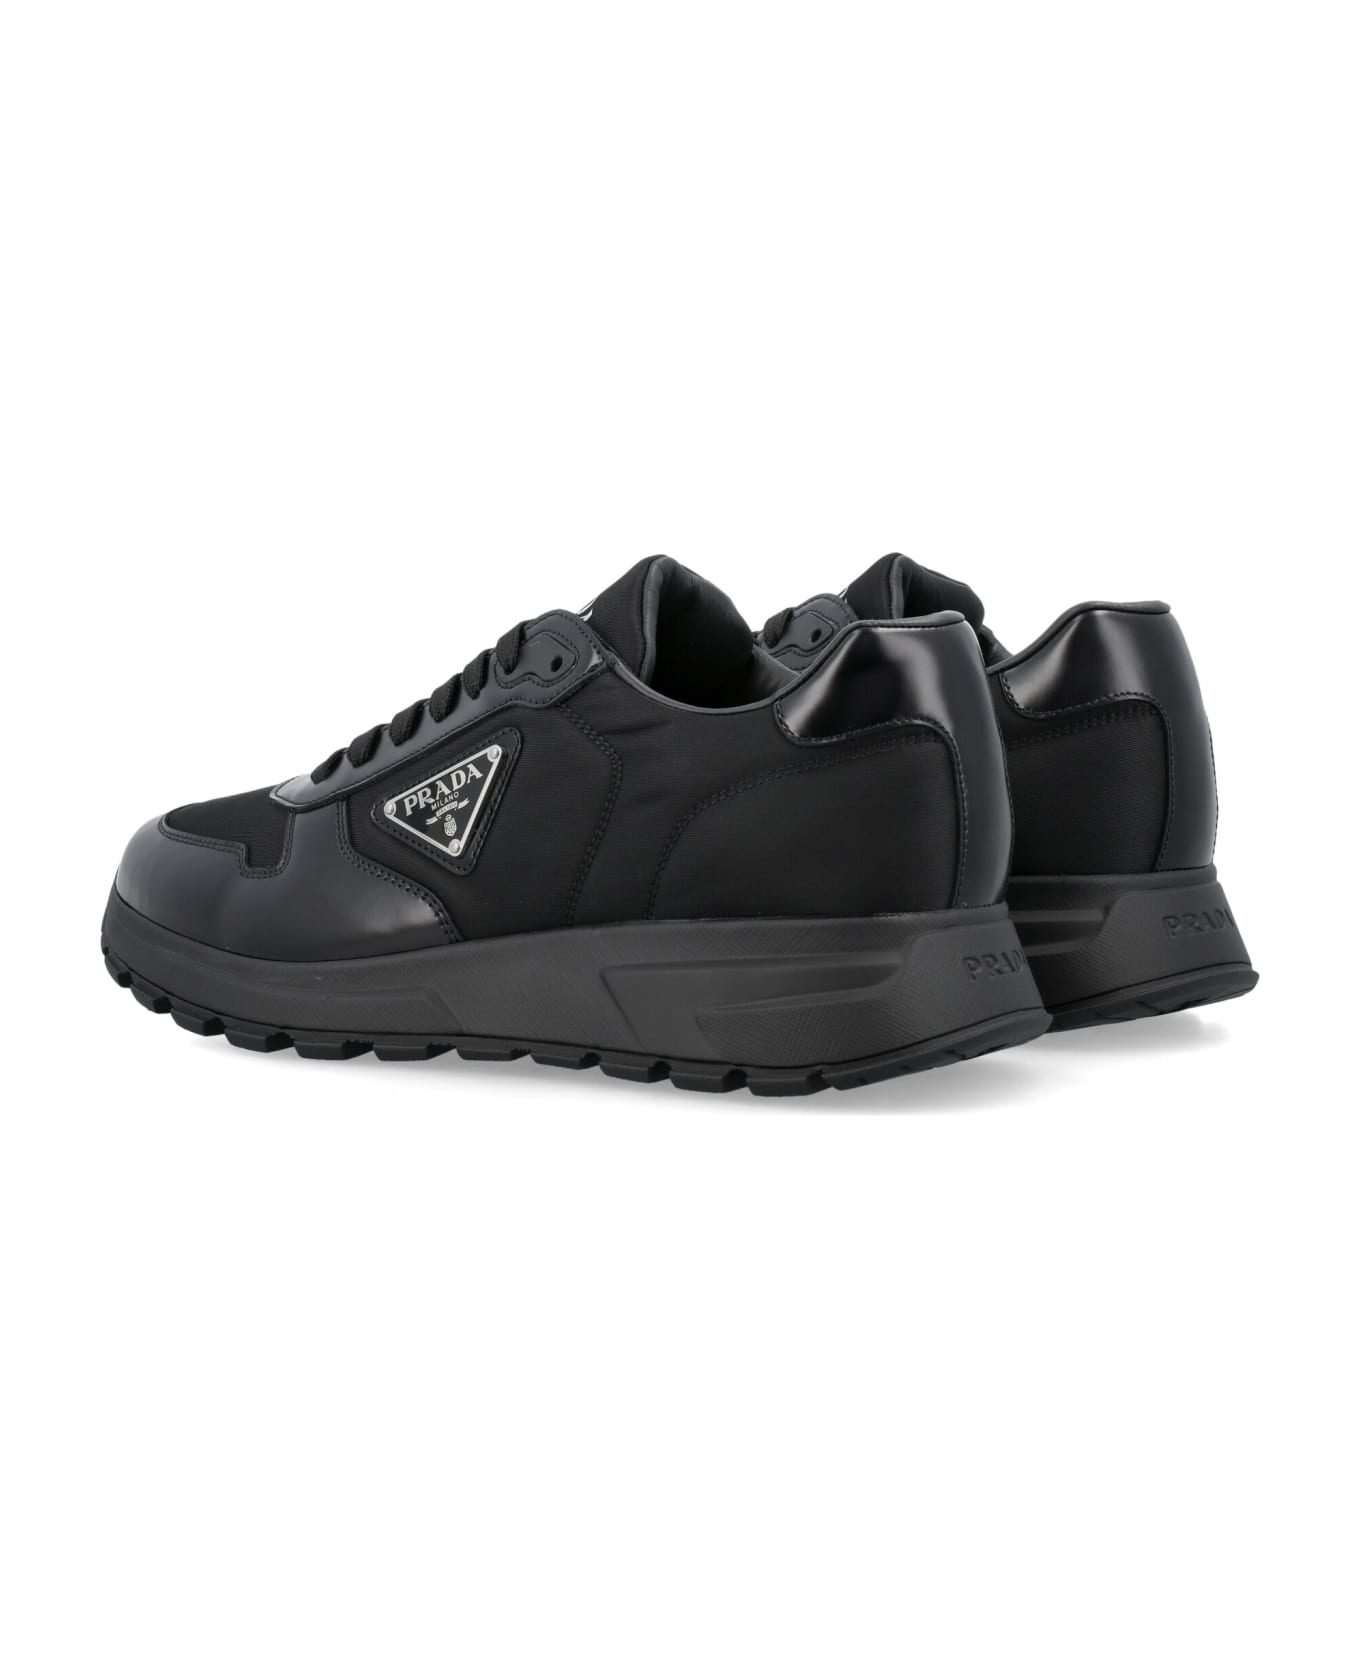 Prada Re-nylon And Brushed Leather Sneakers - F0632